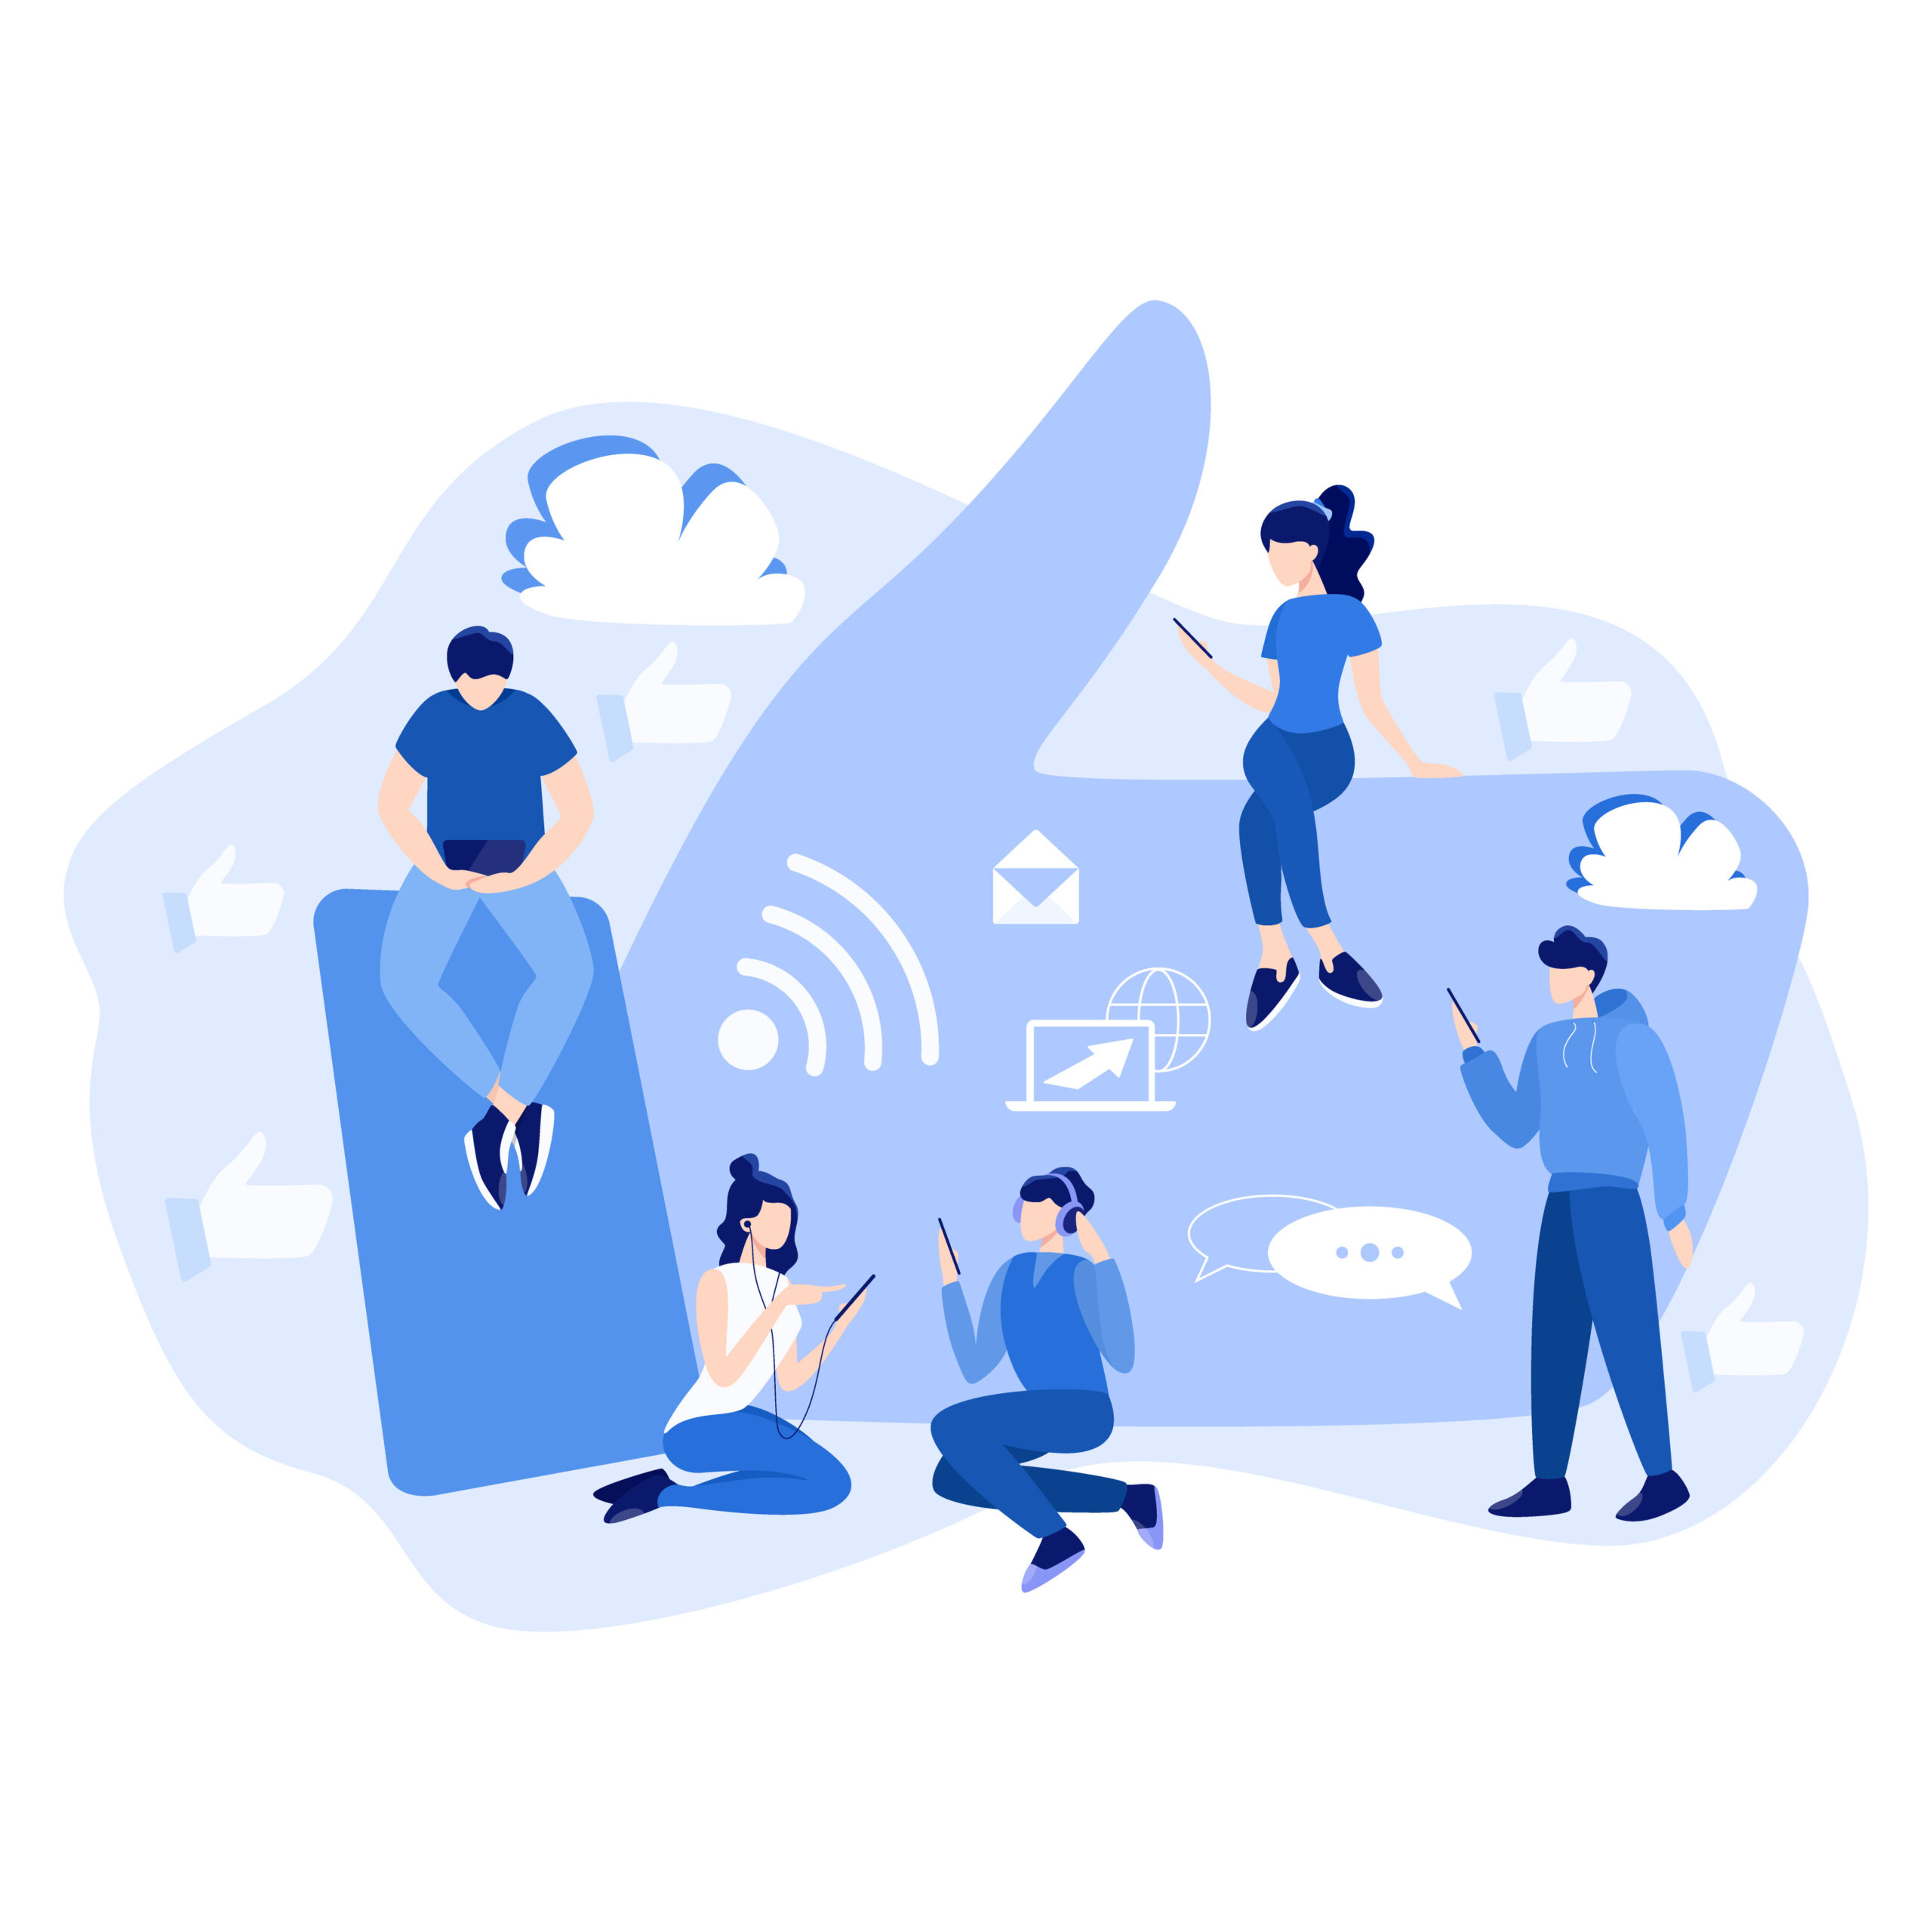 Social media concept. Using network for posting and sharing content. Internet communication and global connection. Isolated flat illustration